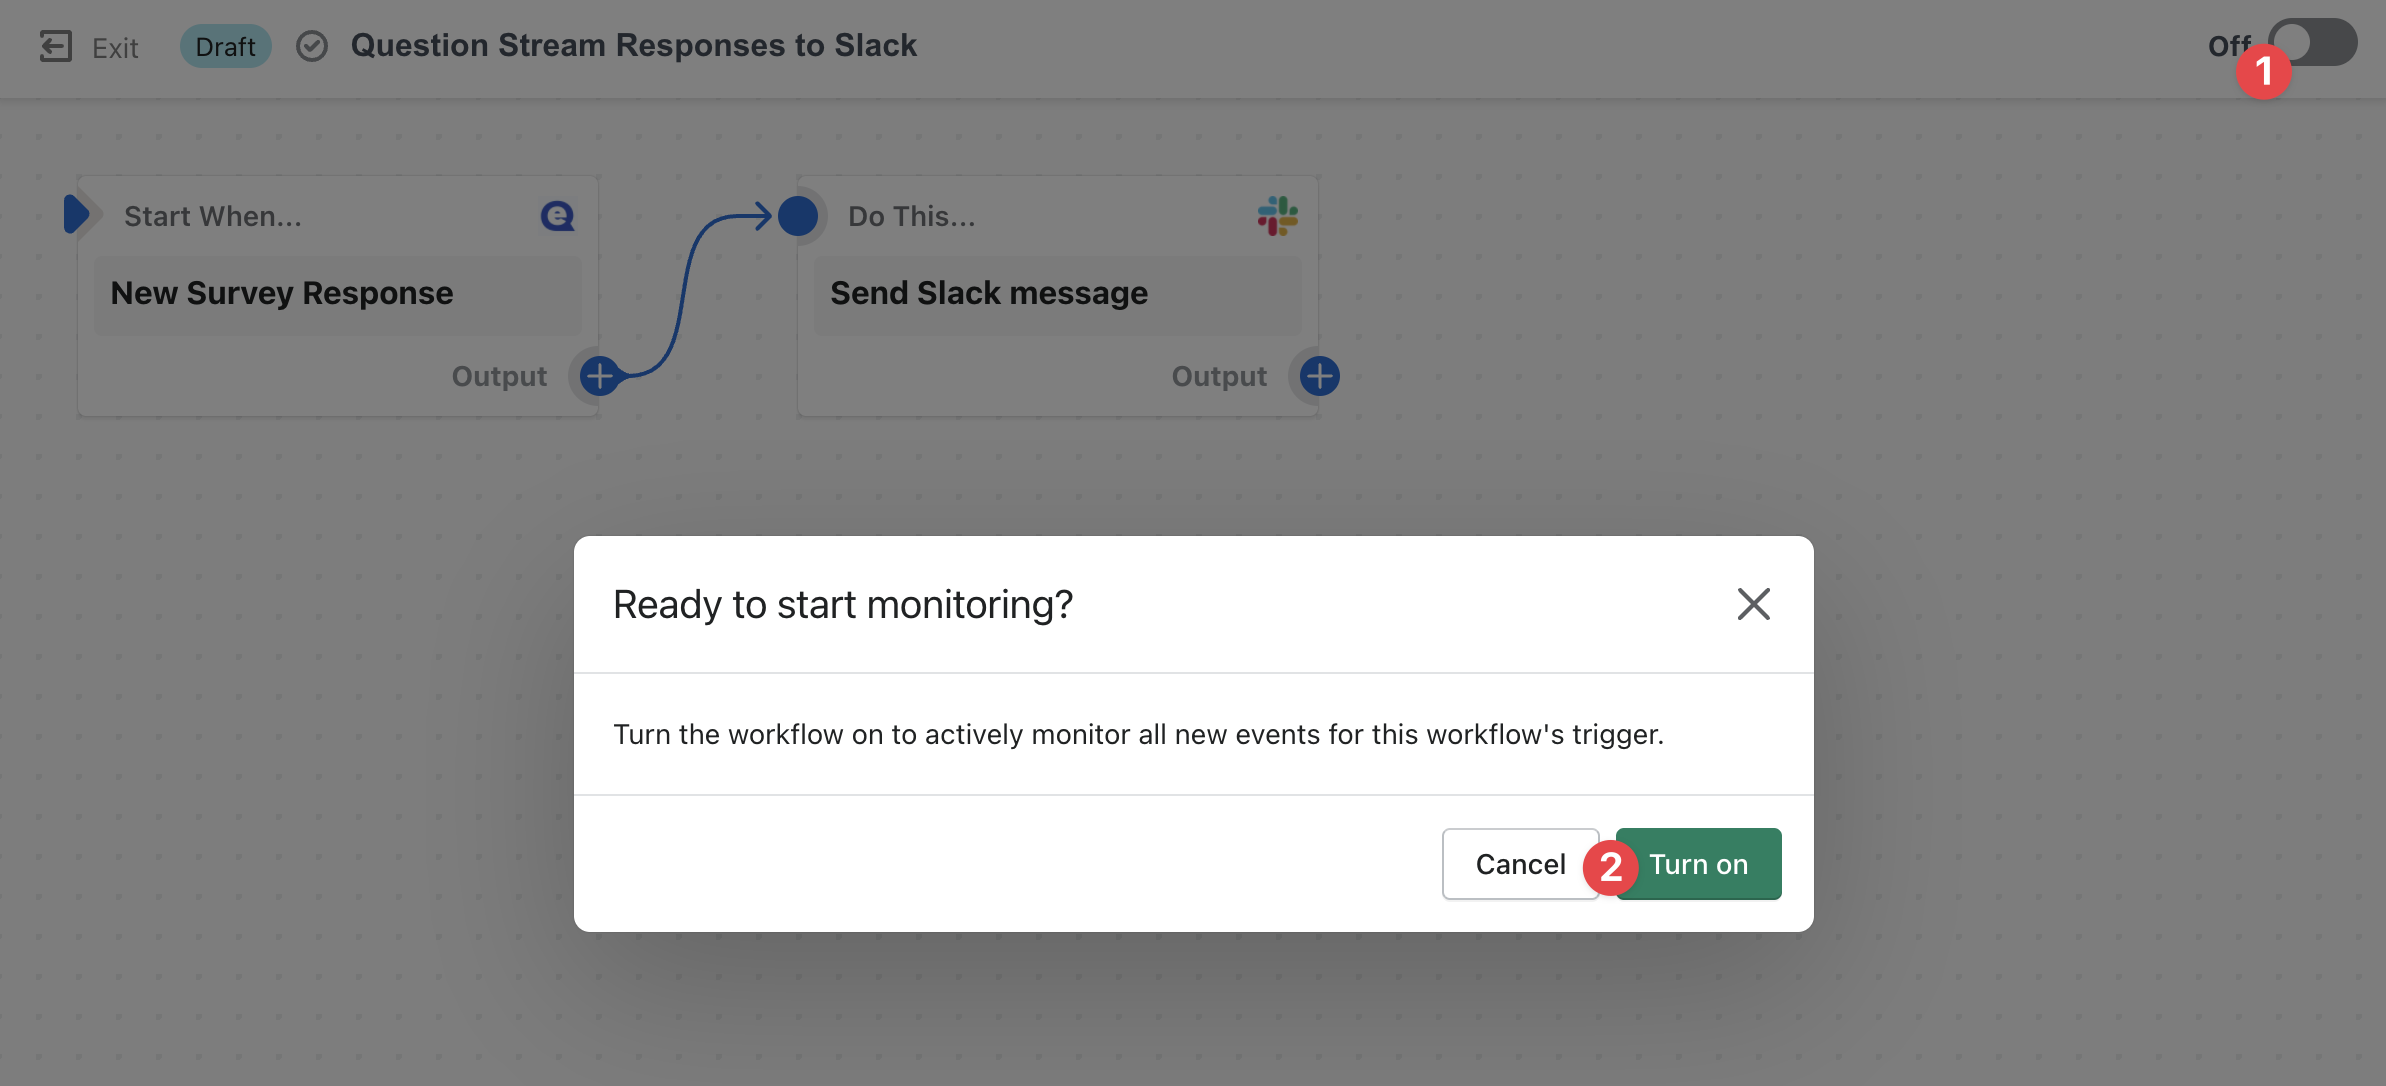 Turn on Question Stream to Slack Shopify Flow workflow.